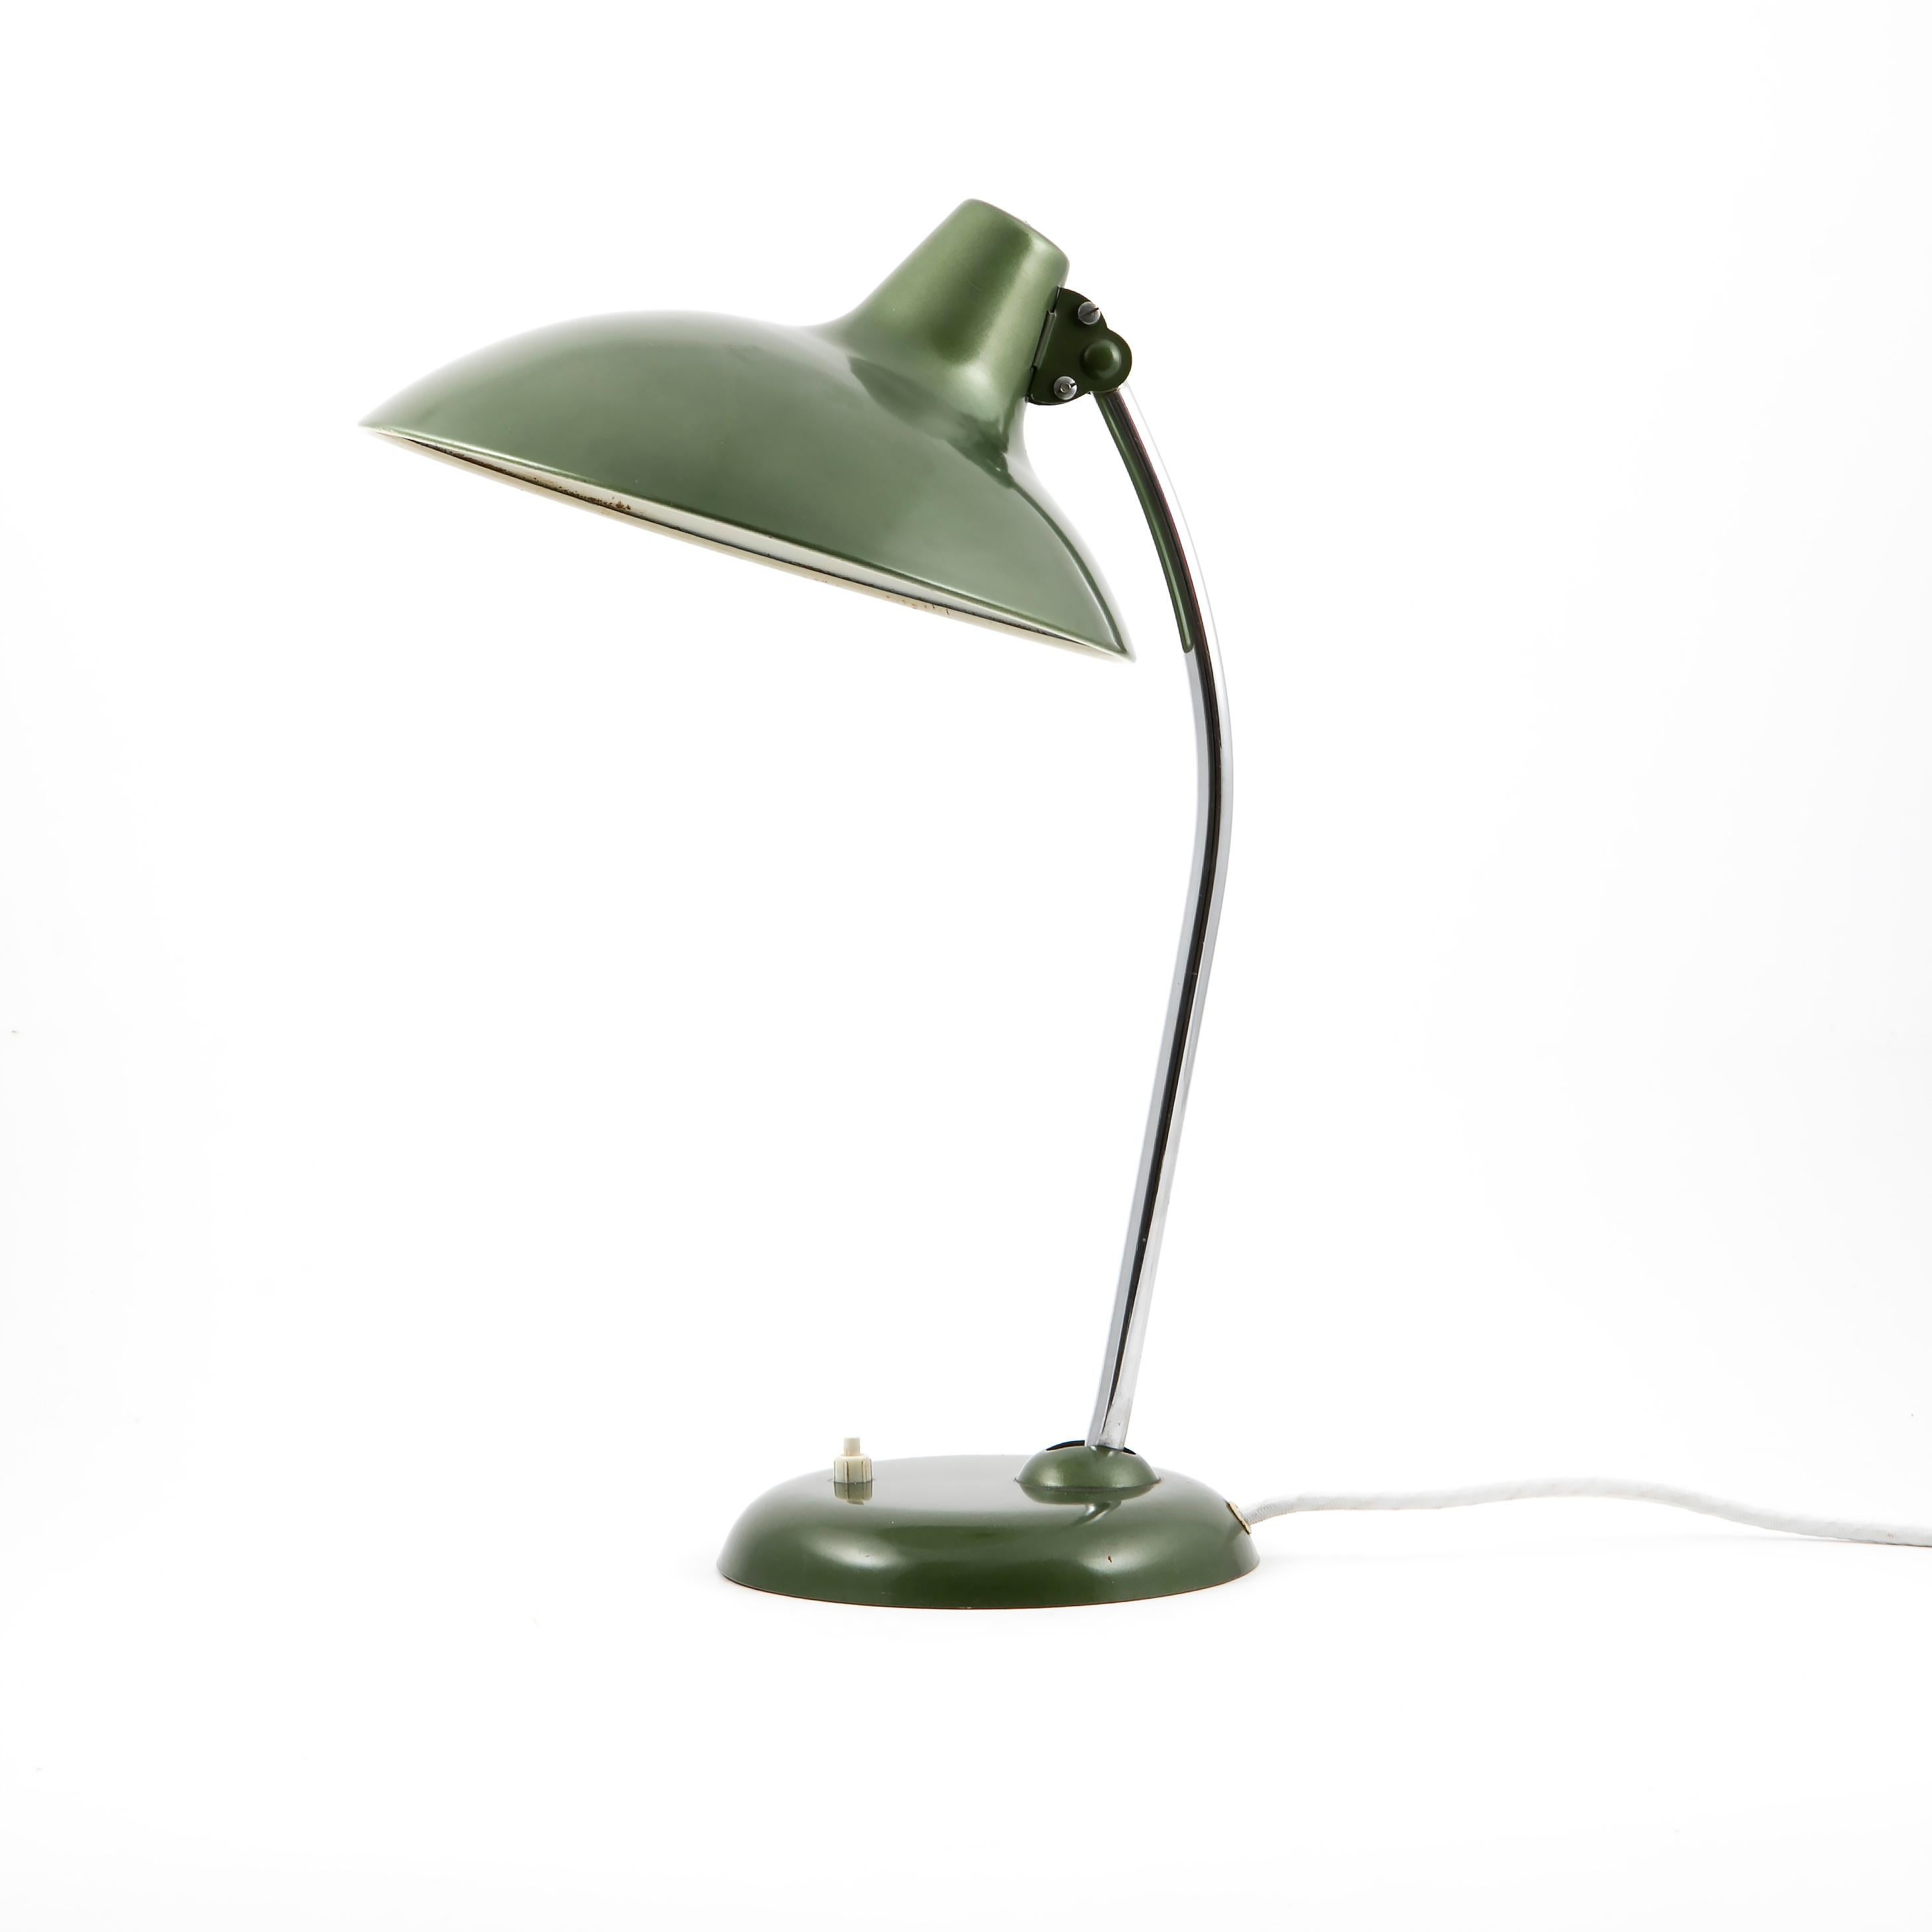 Bauhaus Christian dell desk lamp model 6786 for Kaiser Idell, Germany.
Chromed arm and adjustable metal shade in metallic emerald green.
Lightswith located on base. New cloth-covered wire.
Great original vintage condition.
Germany 1950's